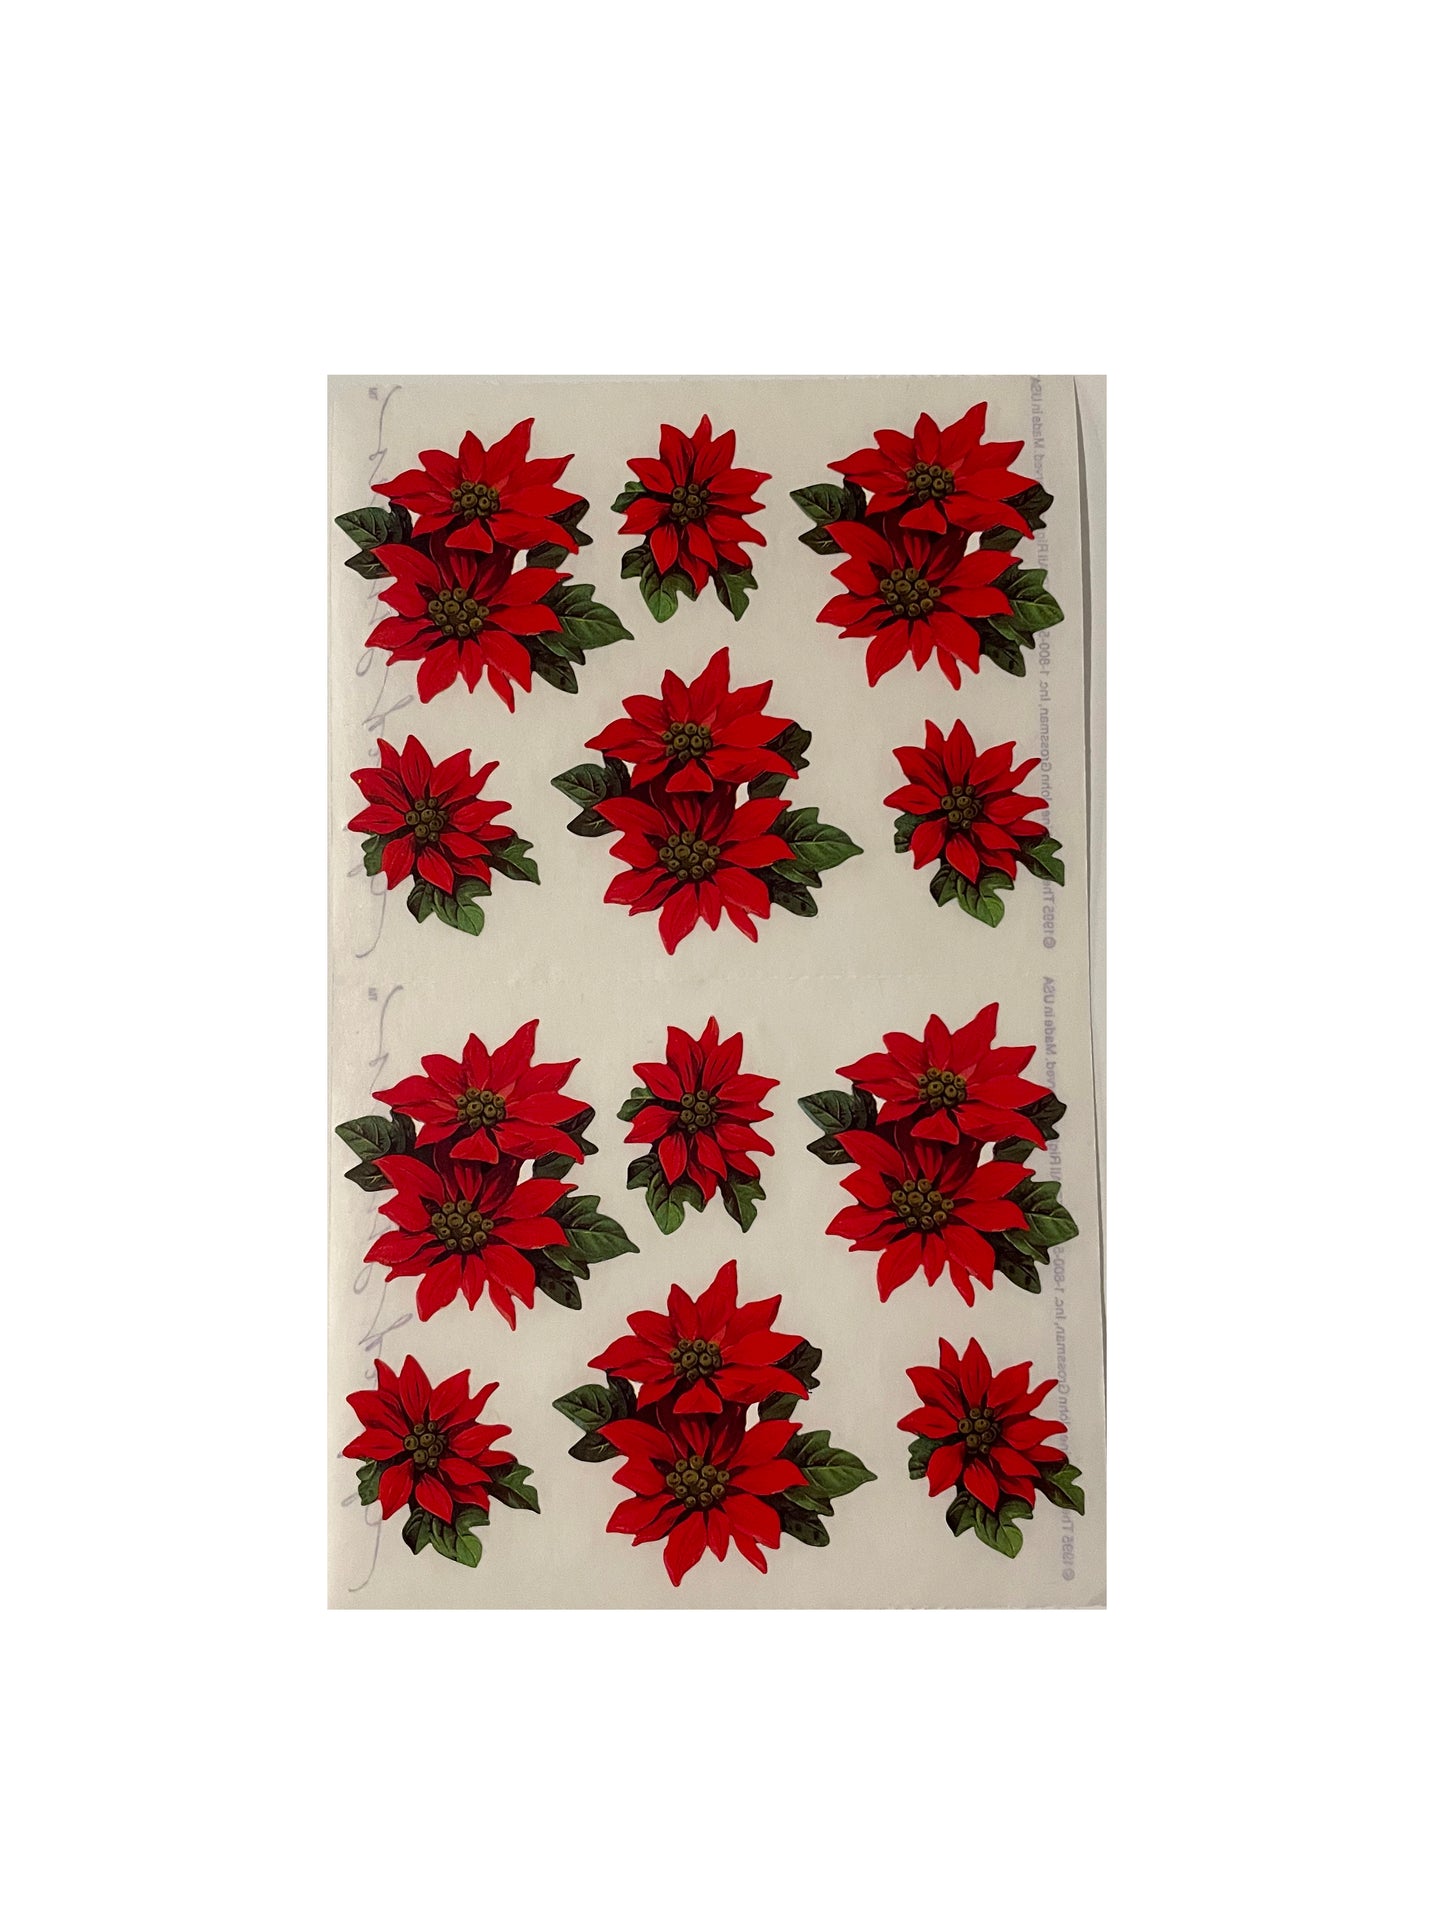 GIFTED LINE: Red Poinsettia Christmas Flower Stickers